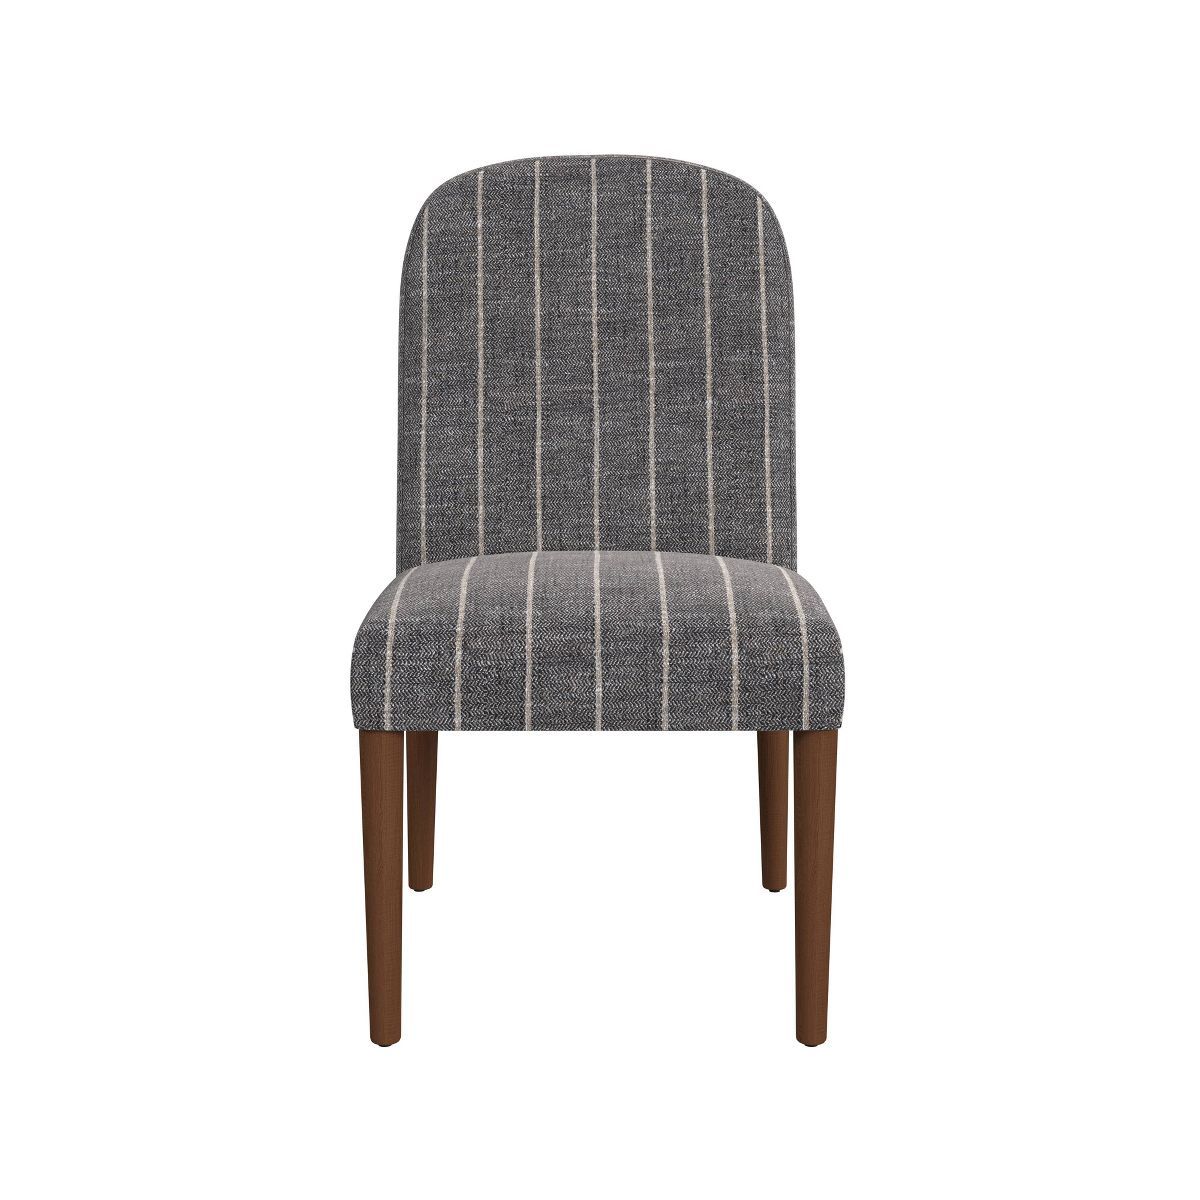 Rounded Back Upholstered Dining Chair - HomePop | Target